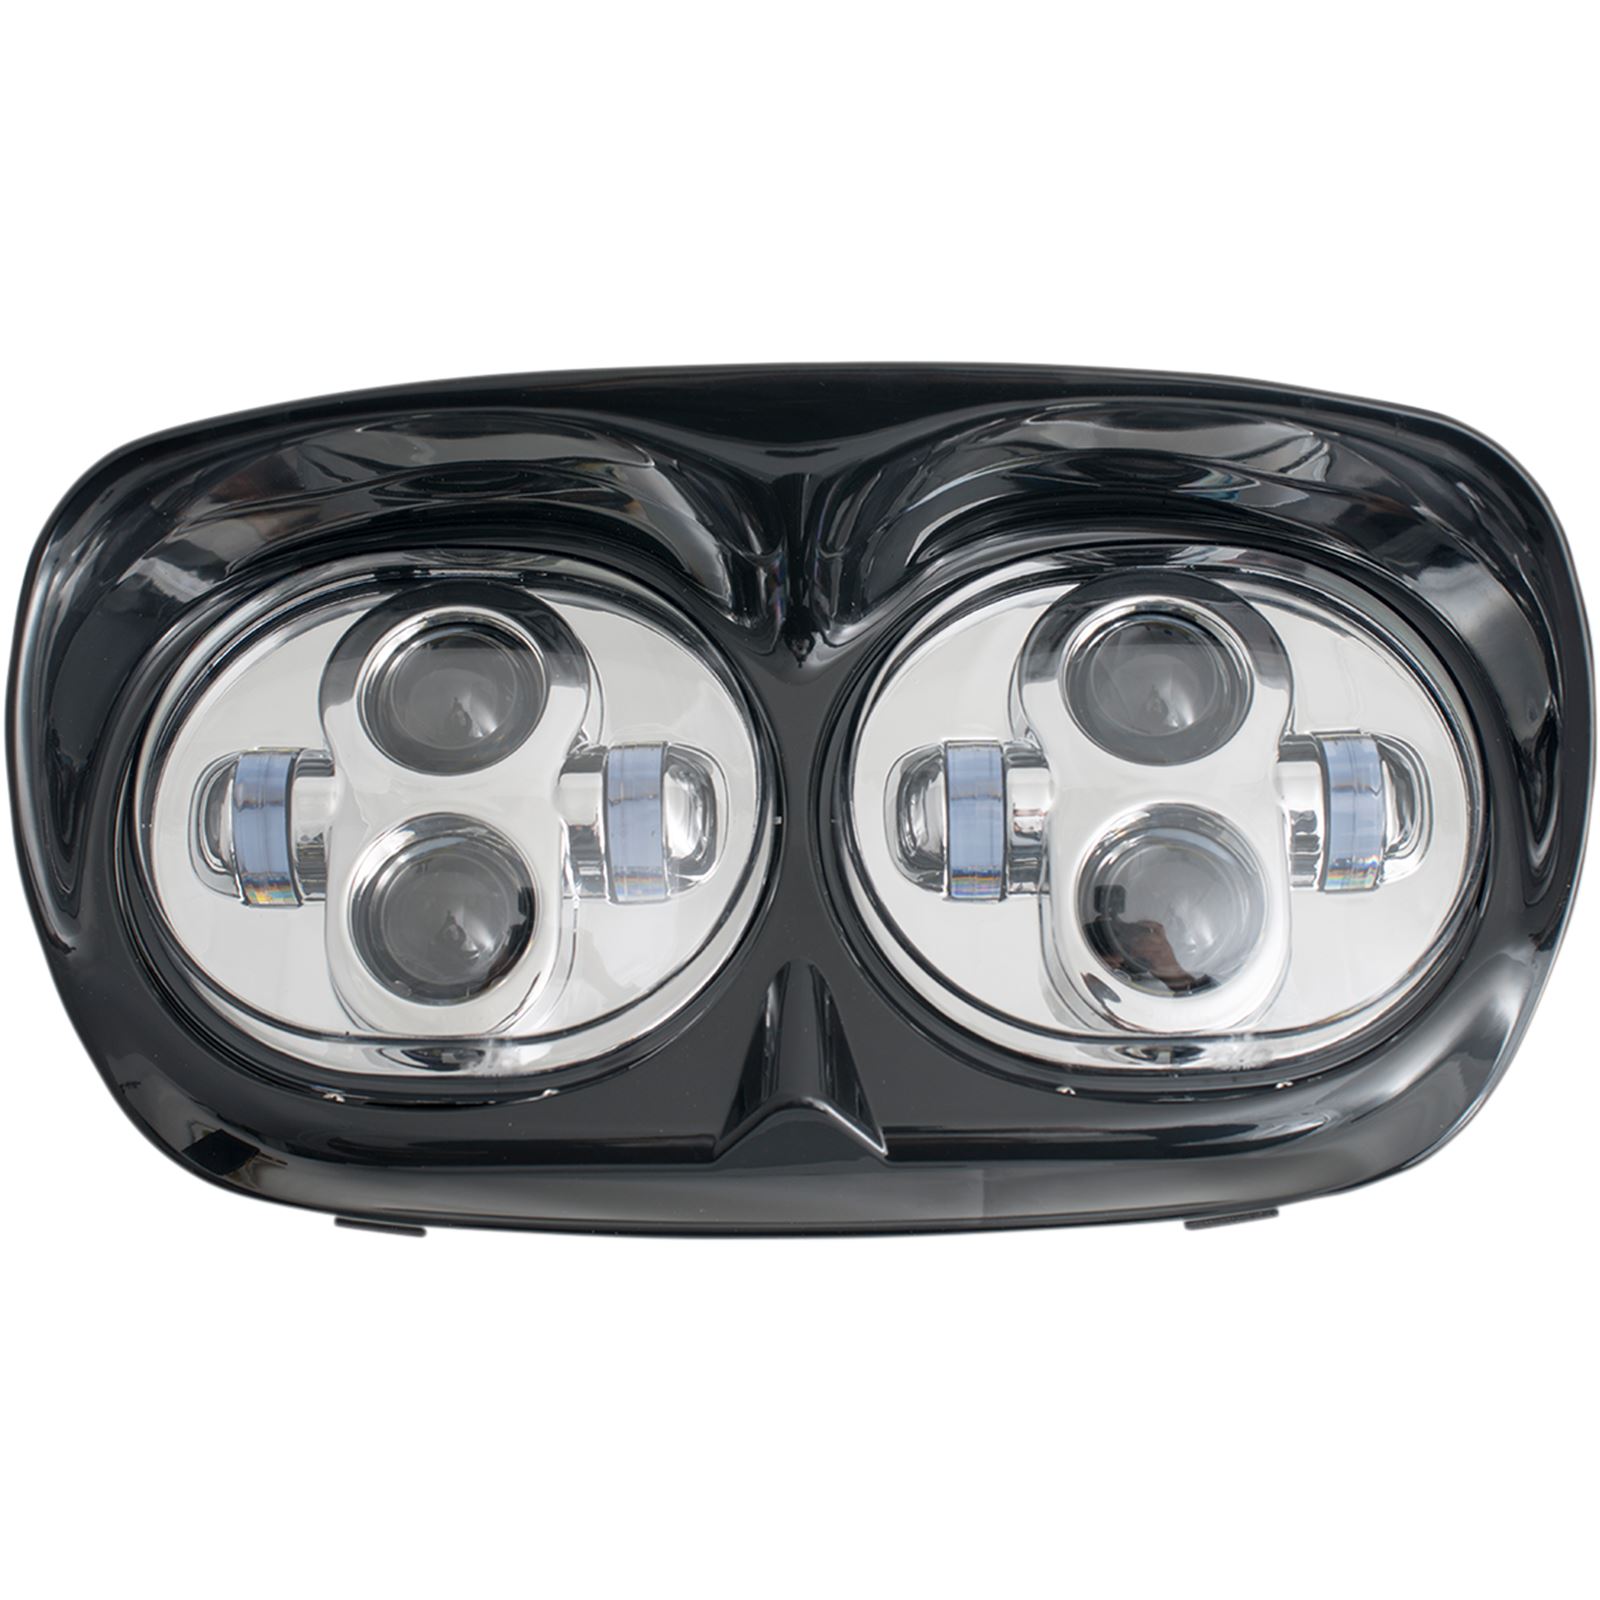 Rivco Products LED Headlight Assembly - Road Glide - Chrome